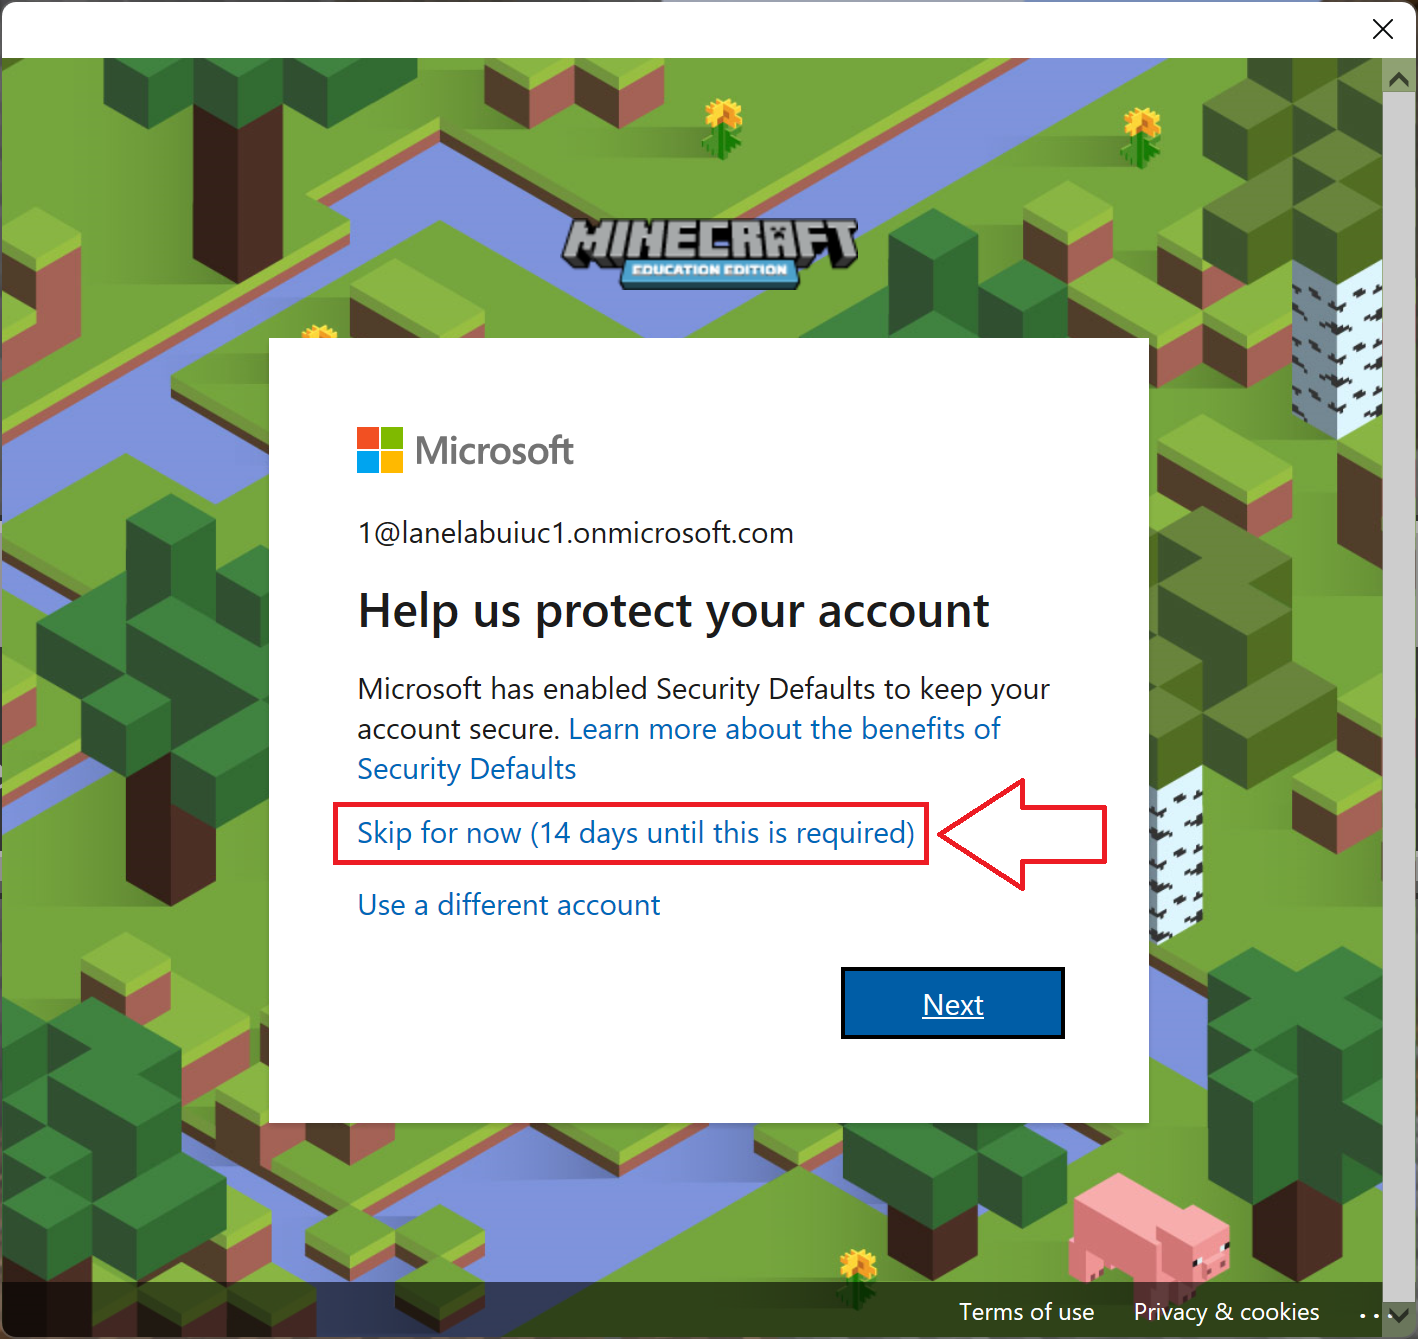 How To Get FREE Minecraft Account 